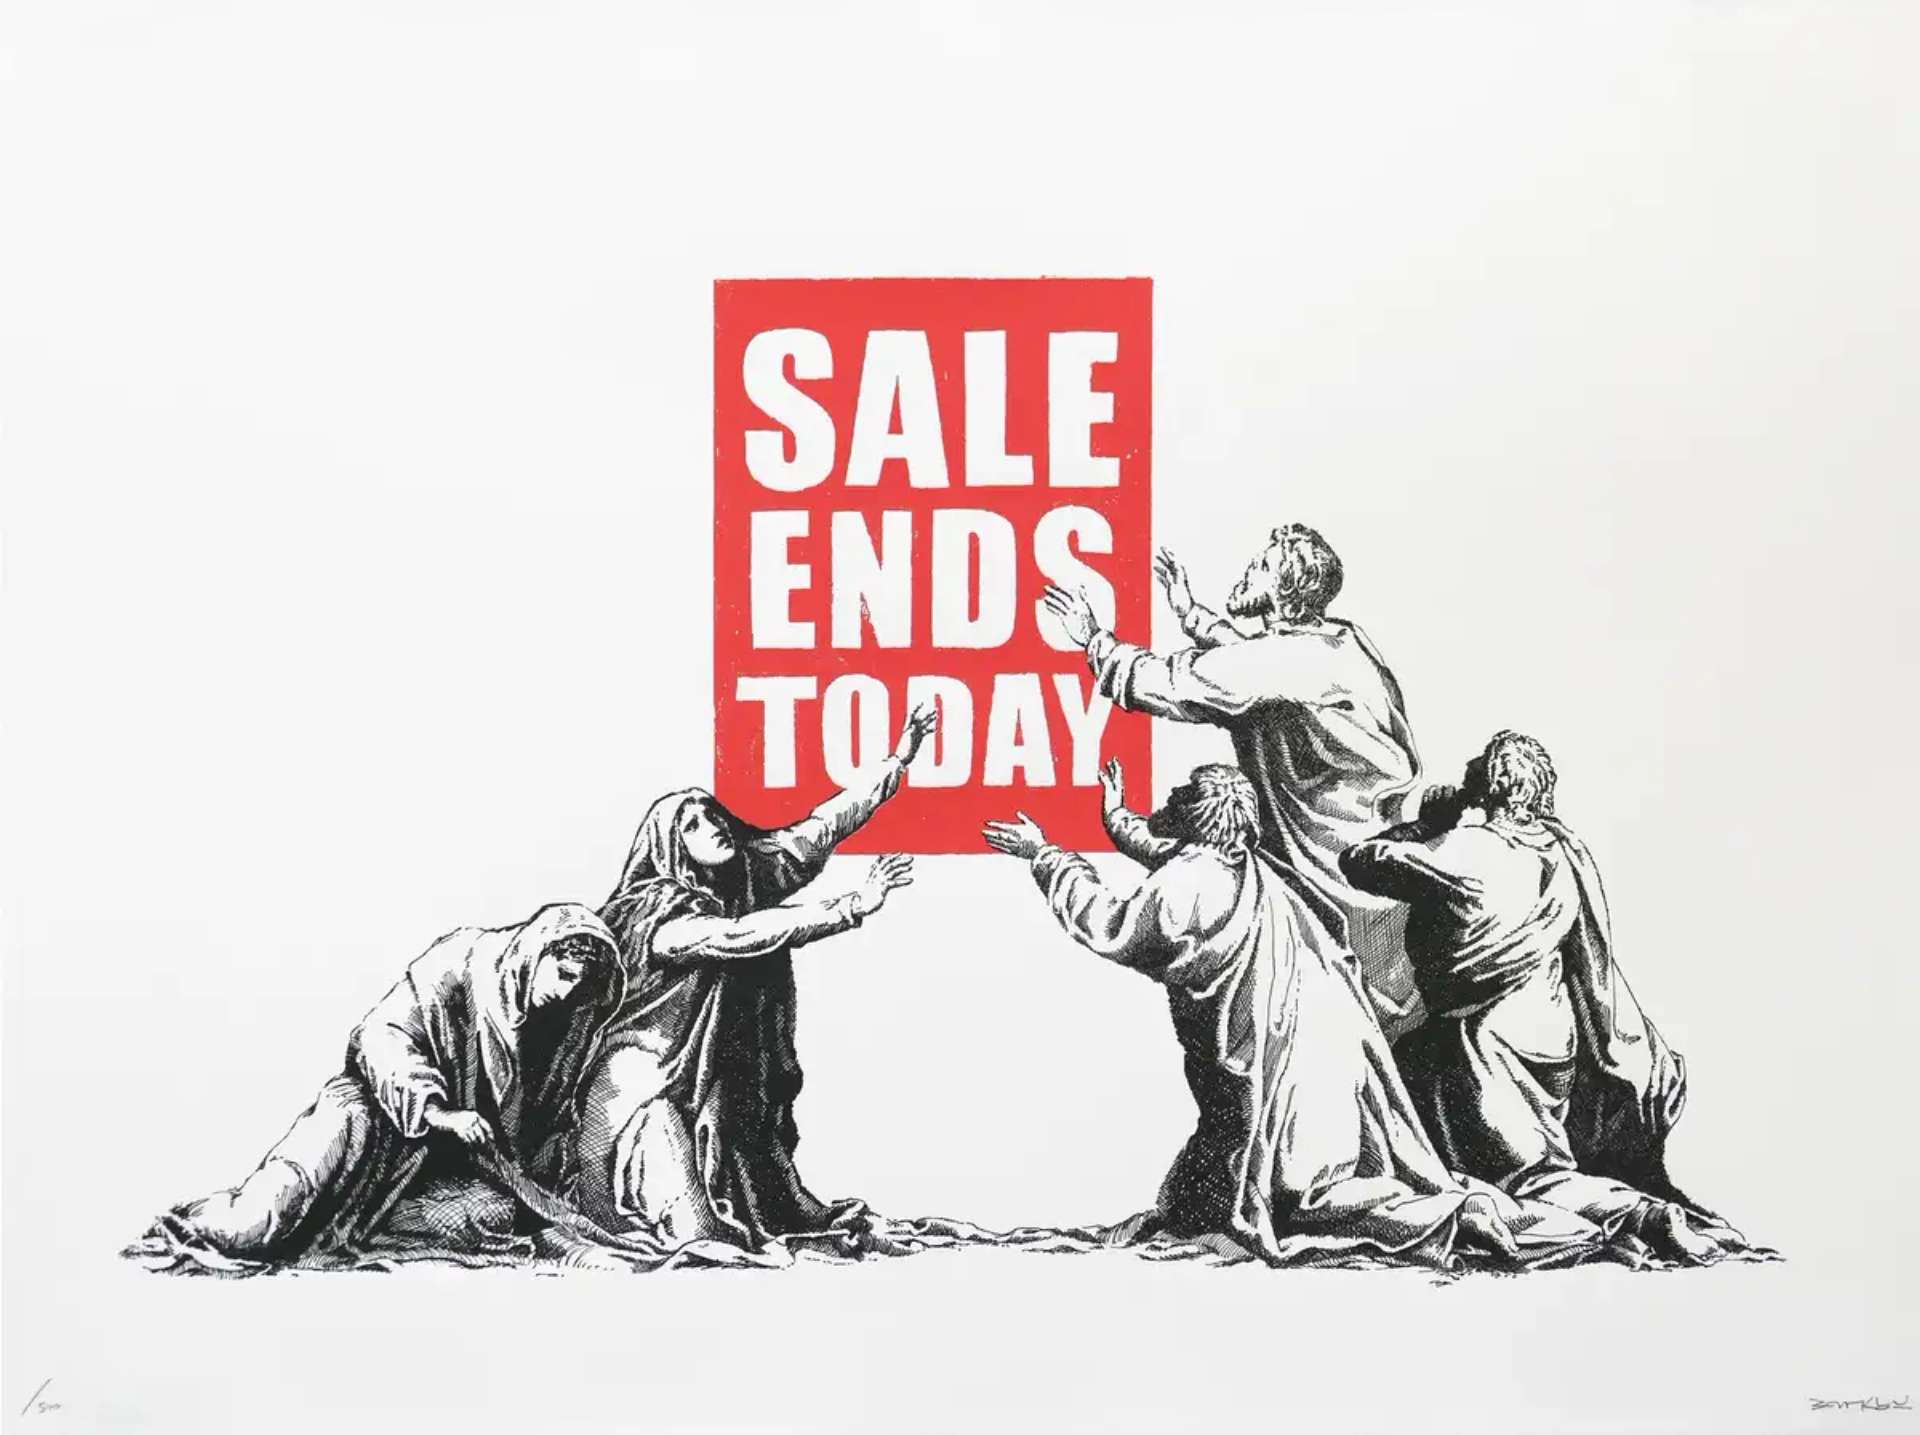 A screenprint depicting figures from the Passion of Christ in black and white, surrounding a red sign at the centre of the composition which reads: SALE ENDS TODAY.